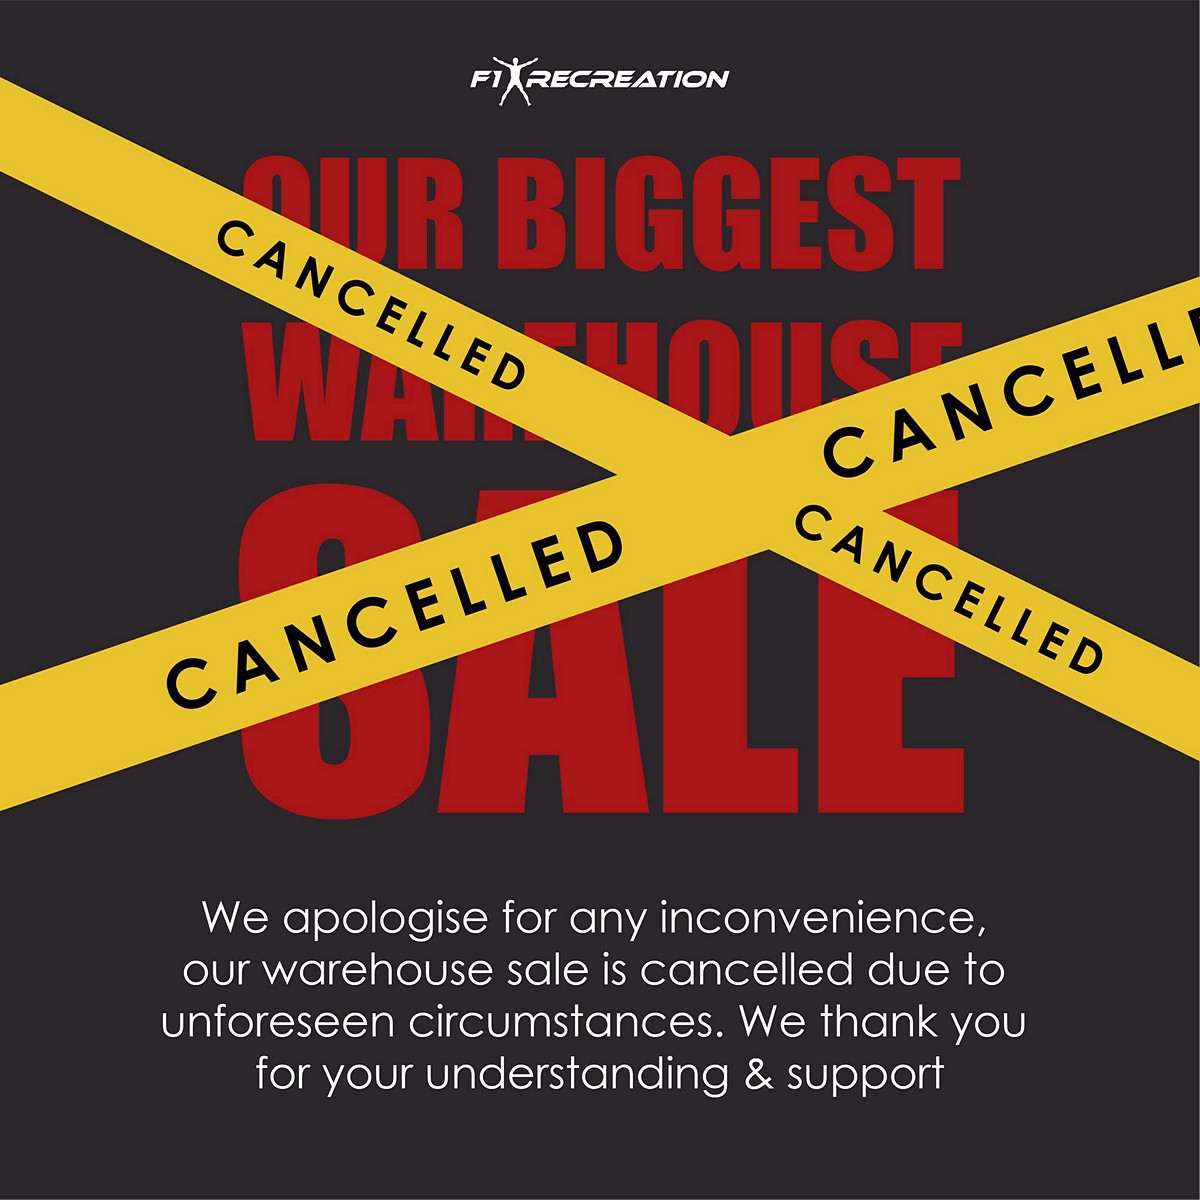 F1-Recreation-Warehouse-Sale-2023-Singapore-Clearance-Noticed-Cancelled-Event 27 Nov-1 Dec 2023: F1 RECREATION Warehouse Sale! (Cancelled)